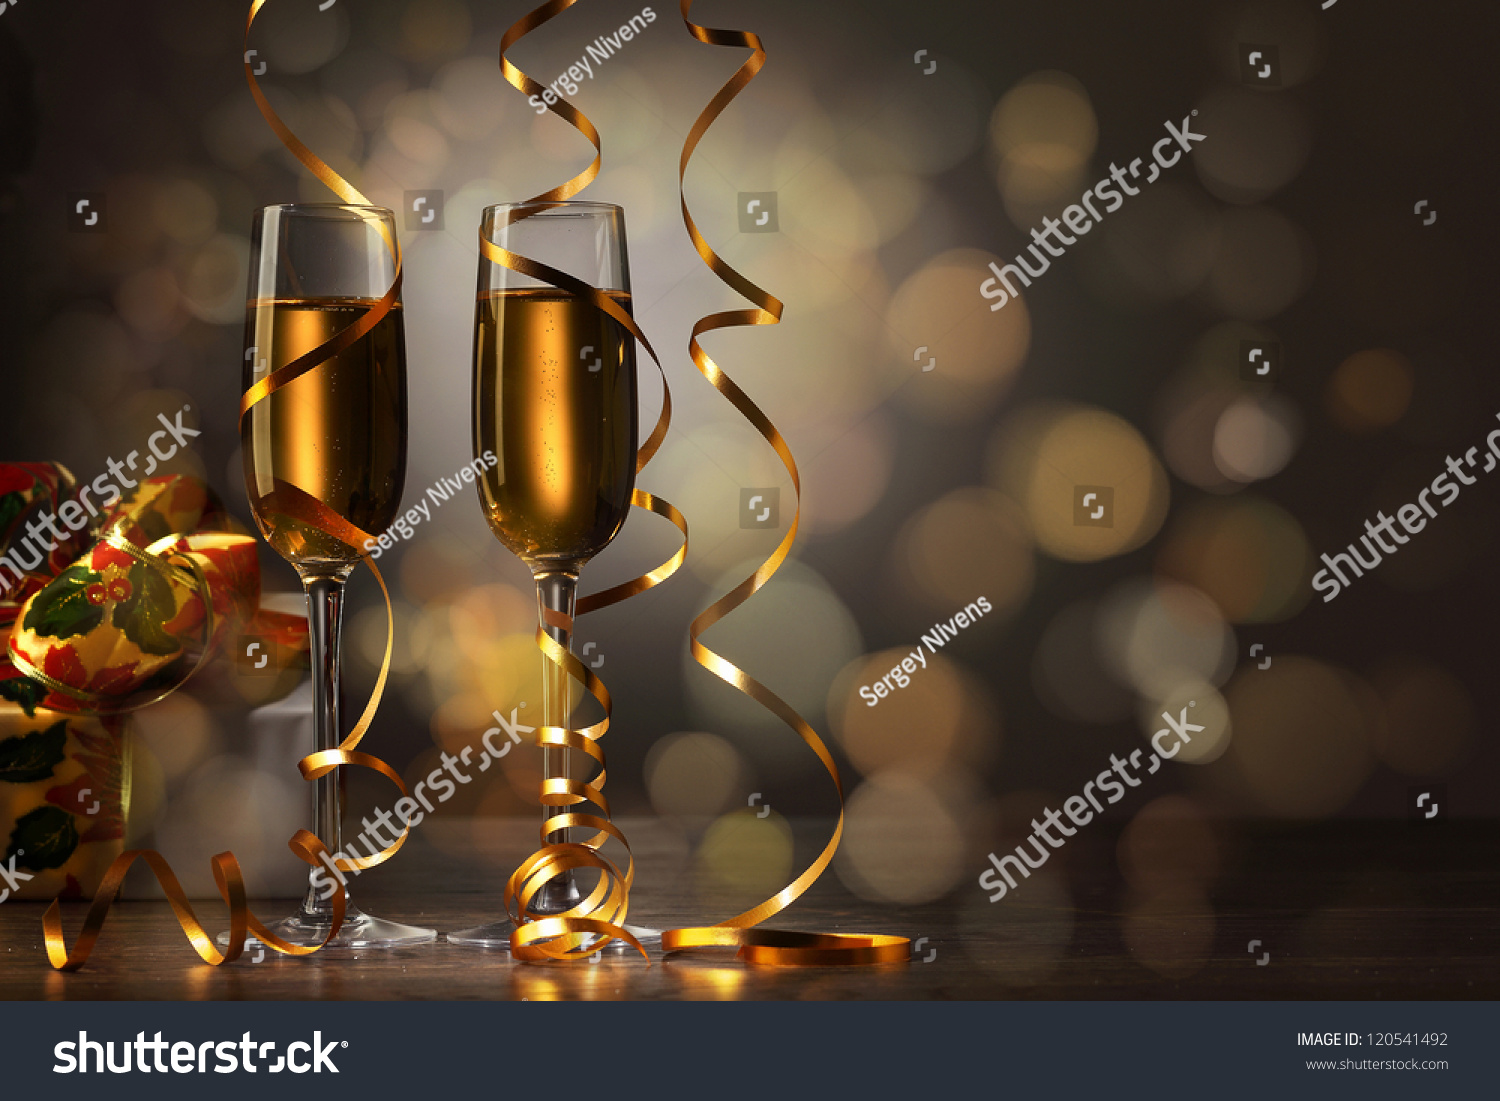 Two champagne glasses ready to bring in the New Year #120541492